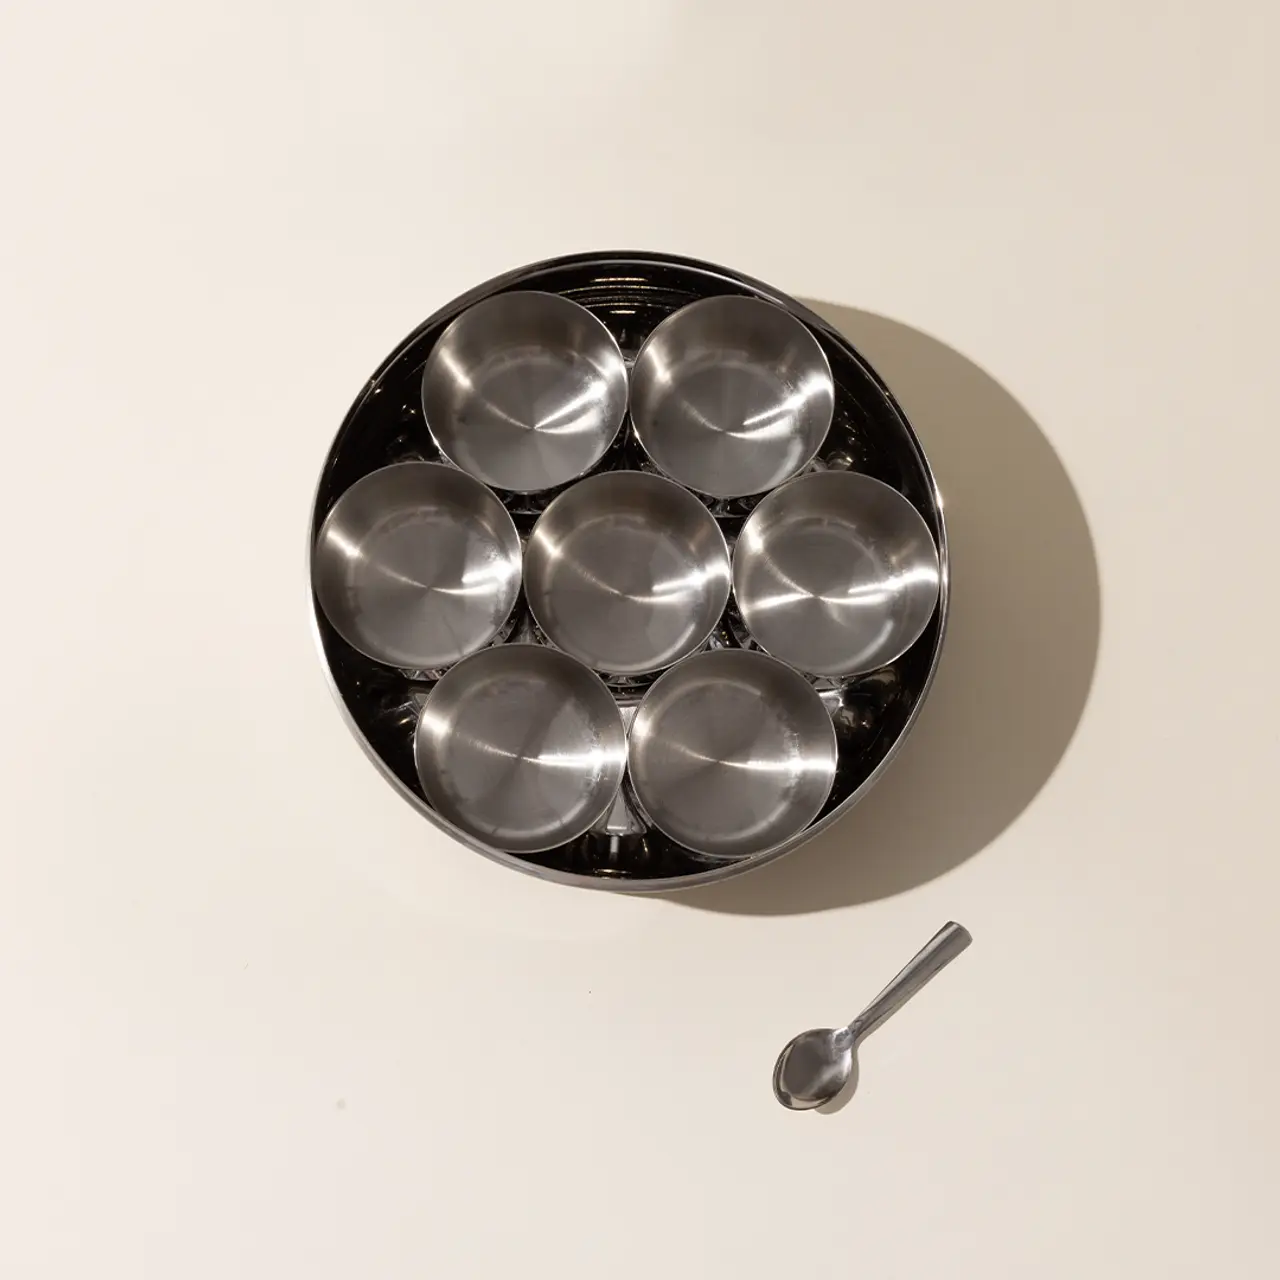 Seven empty metal bowls are neatly arranged inside a larger bowl next to a spoon on a light surface.